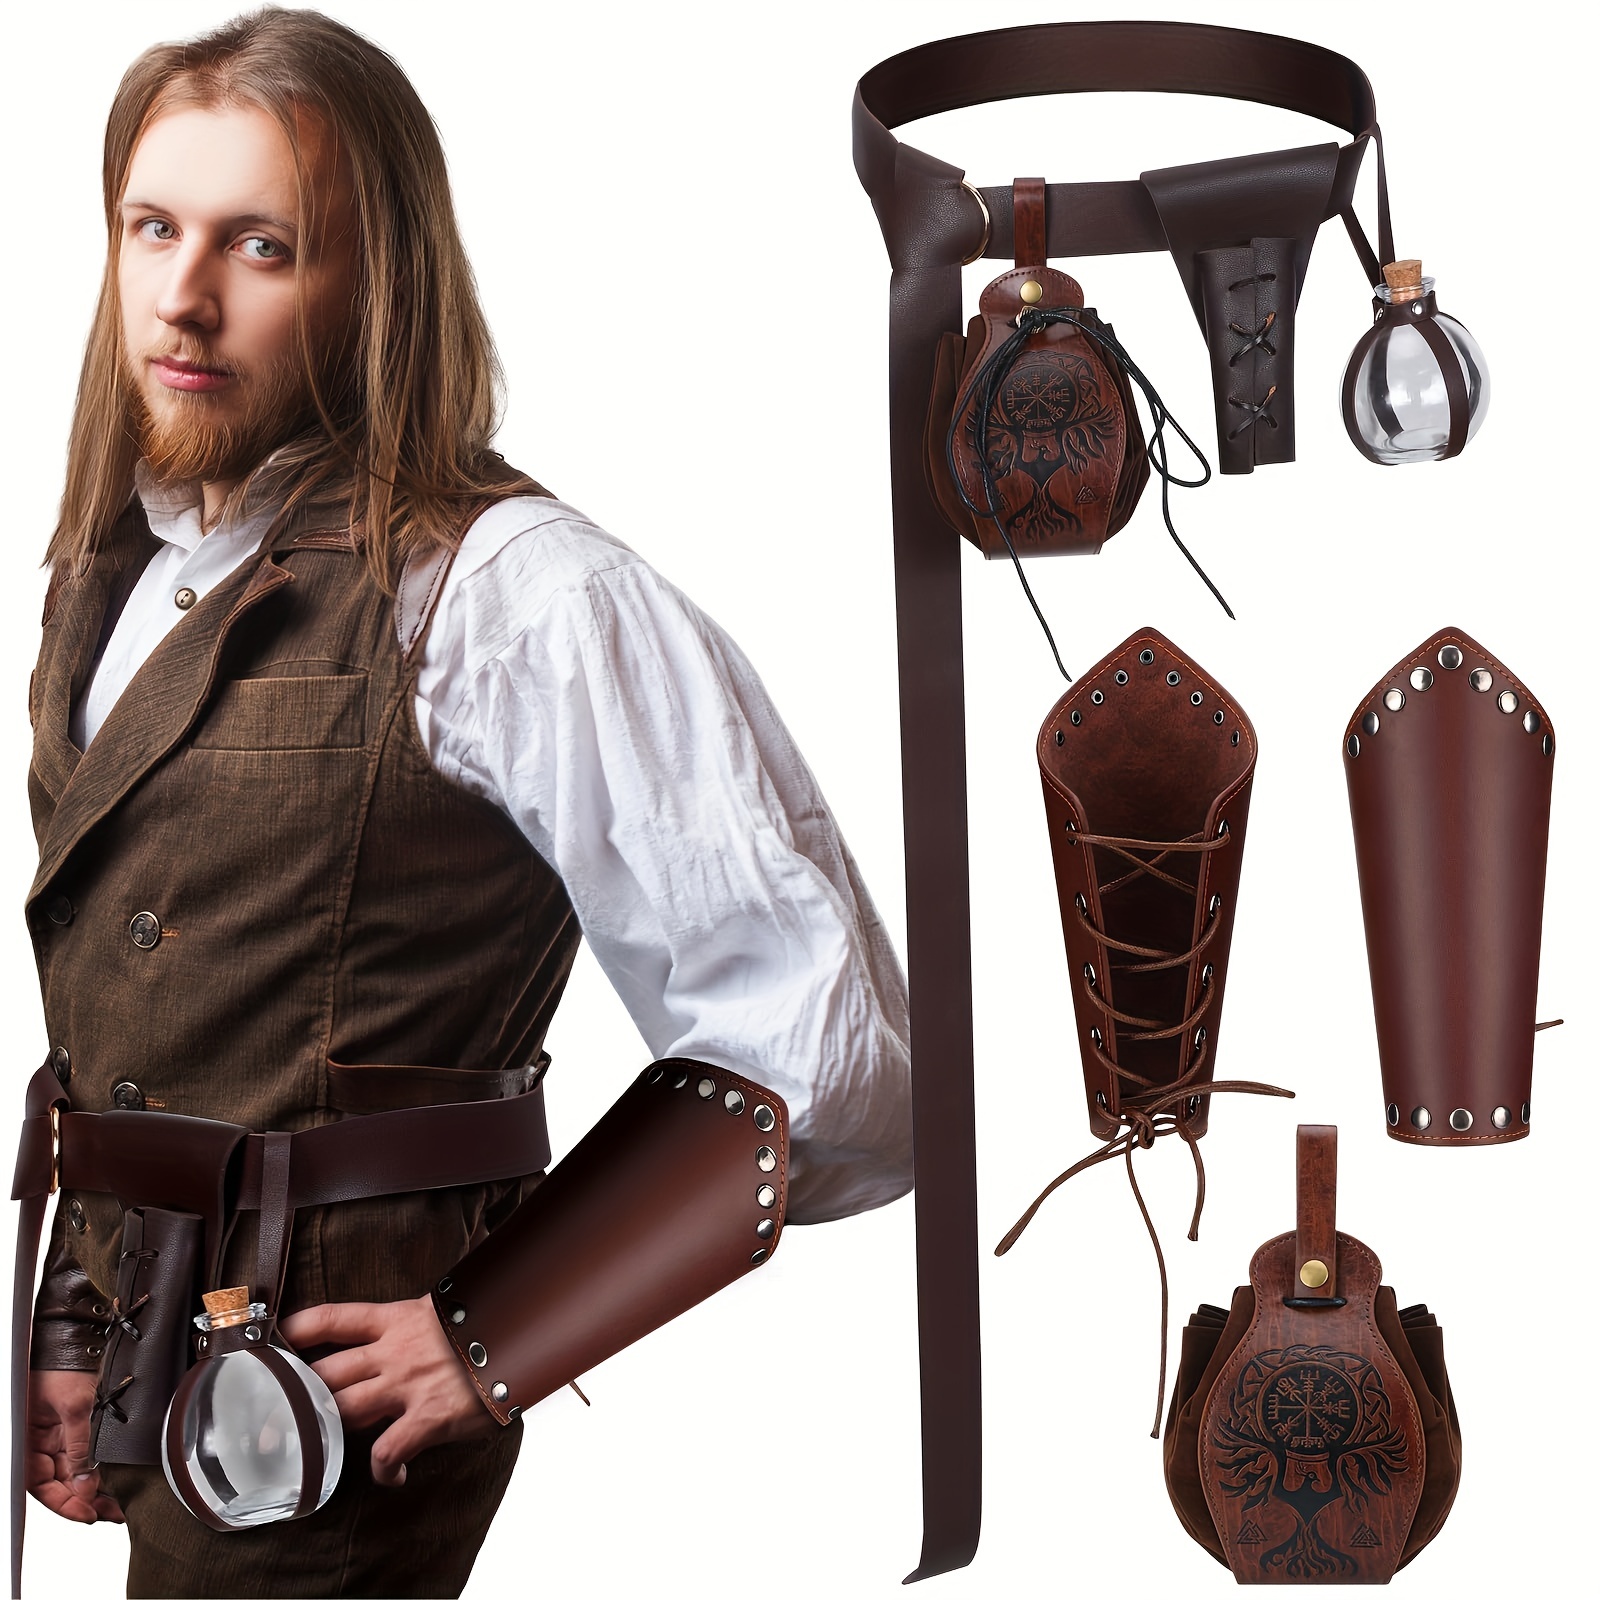  BEACANDY Men's Renaissance Viking Costume with Leather Bracers,  Cloak, Potion Bag, Viking Sword Holder for Ren Faire Cosplay : Clothing,  Shoes & Jewelry